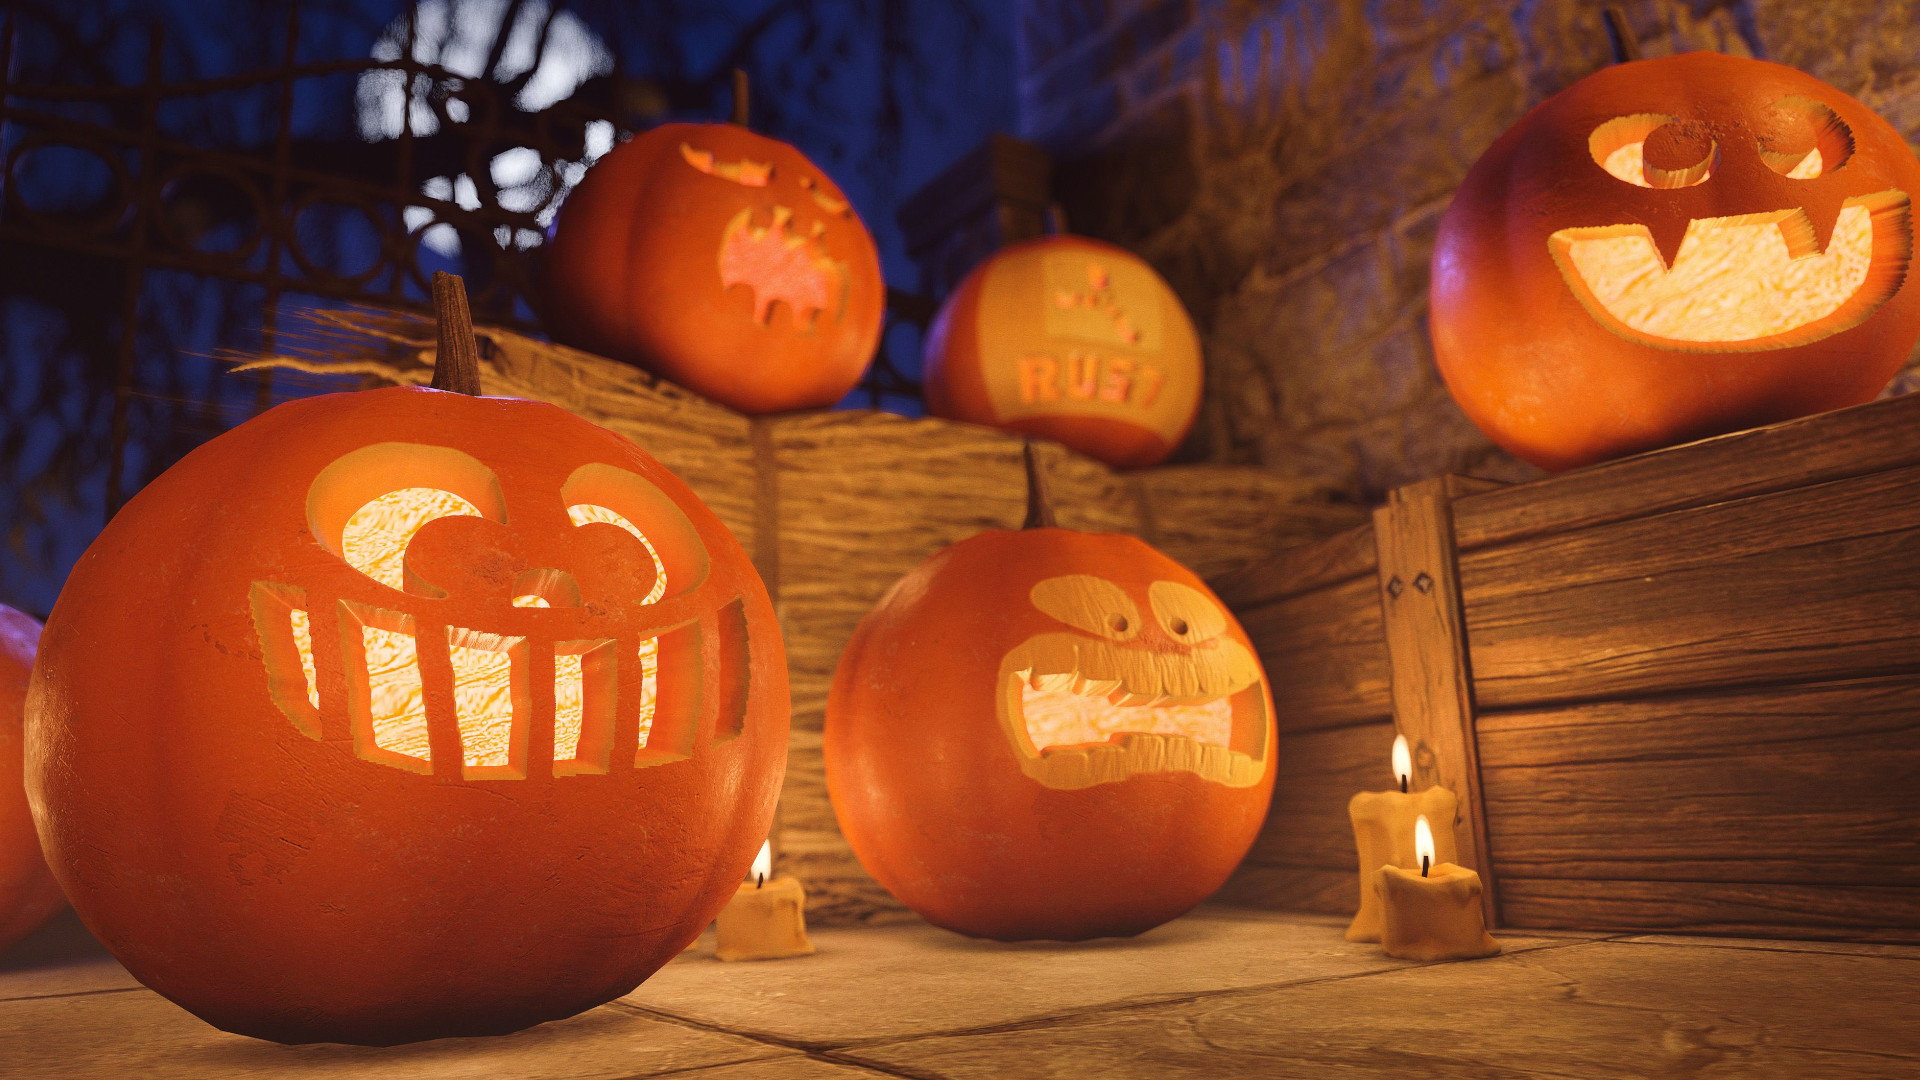 Rust will let you trick or treat for an M249